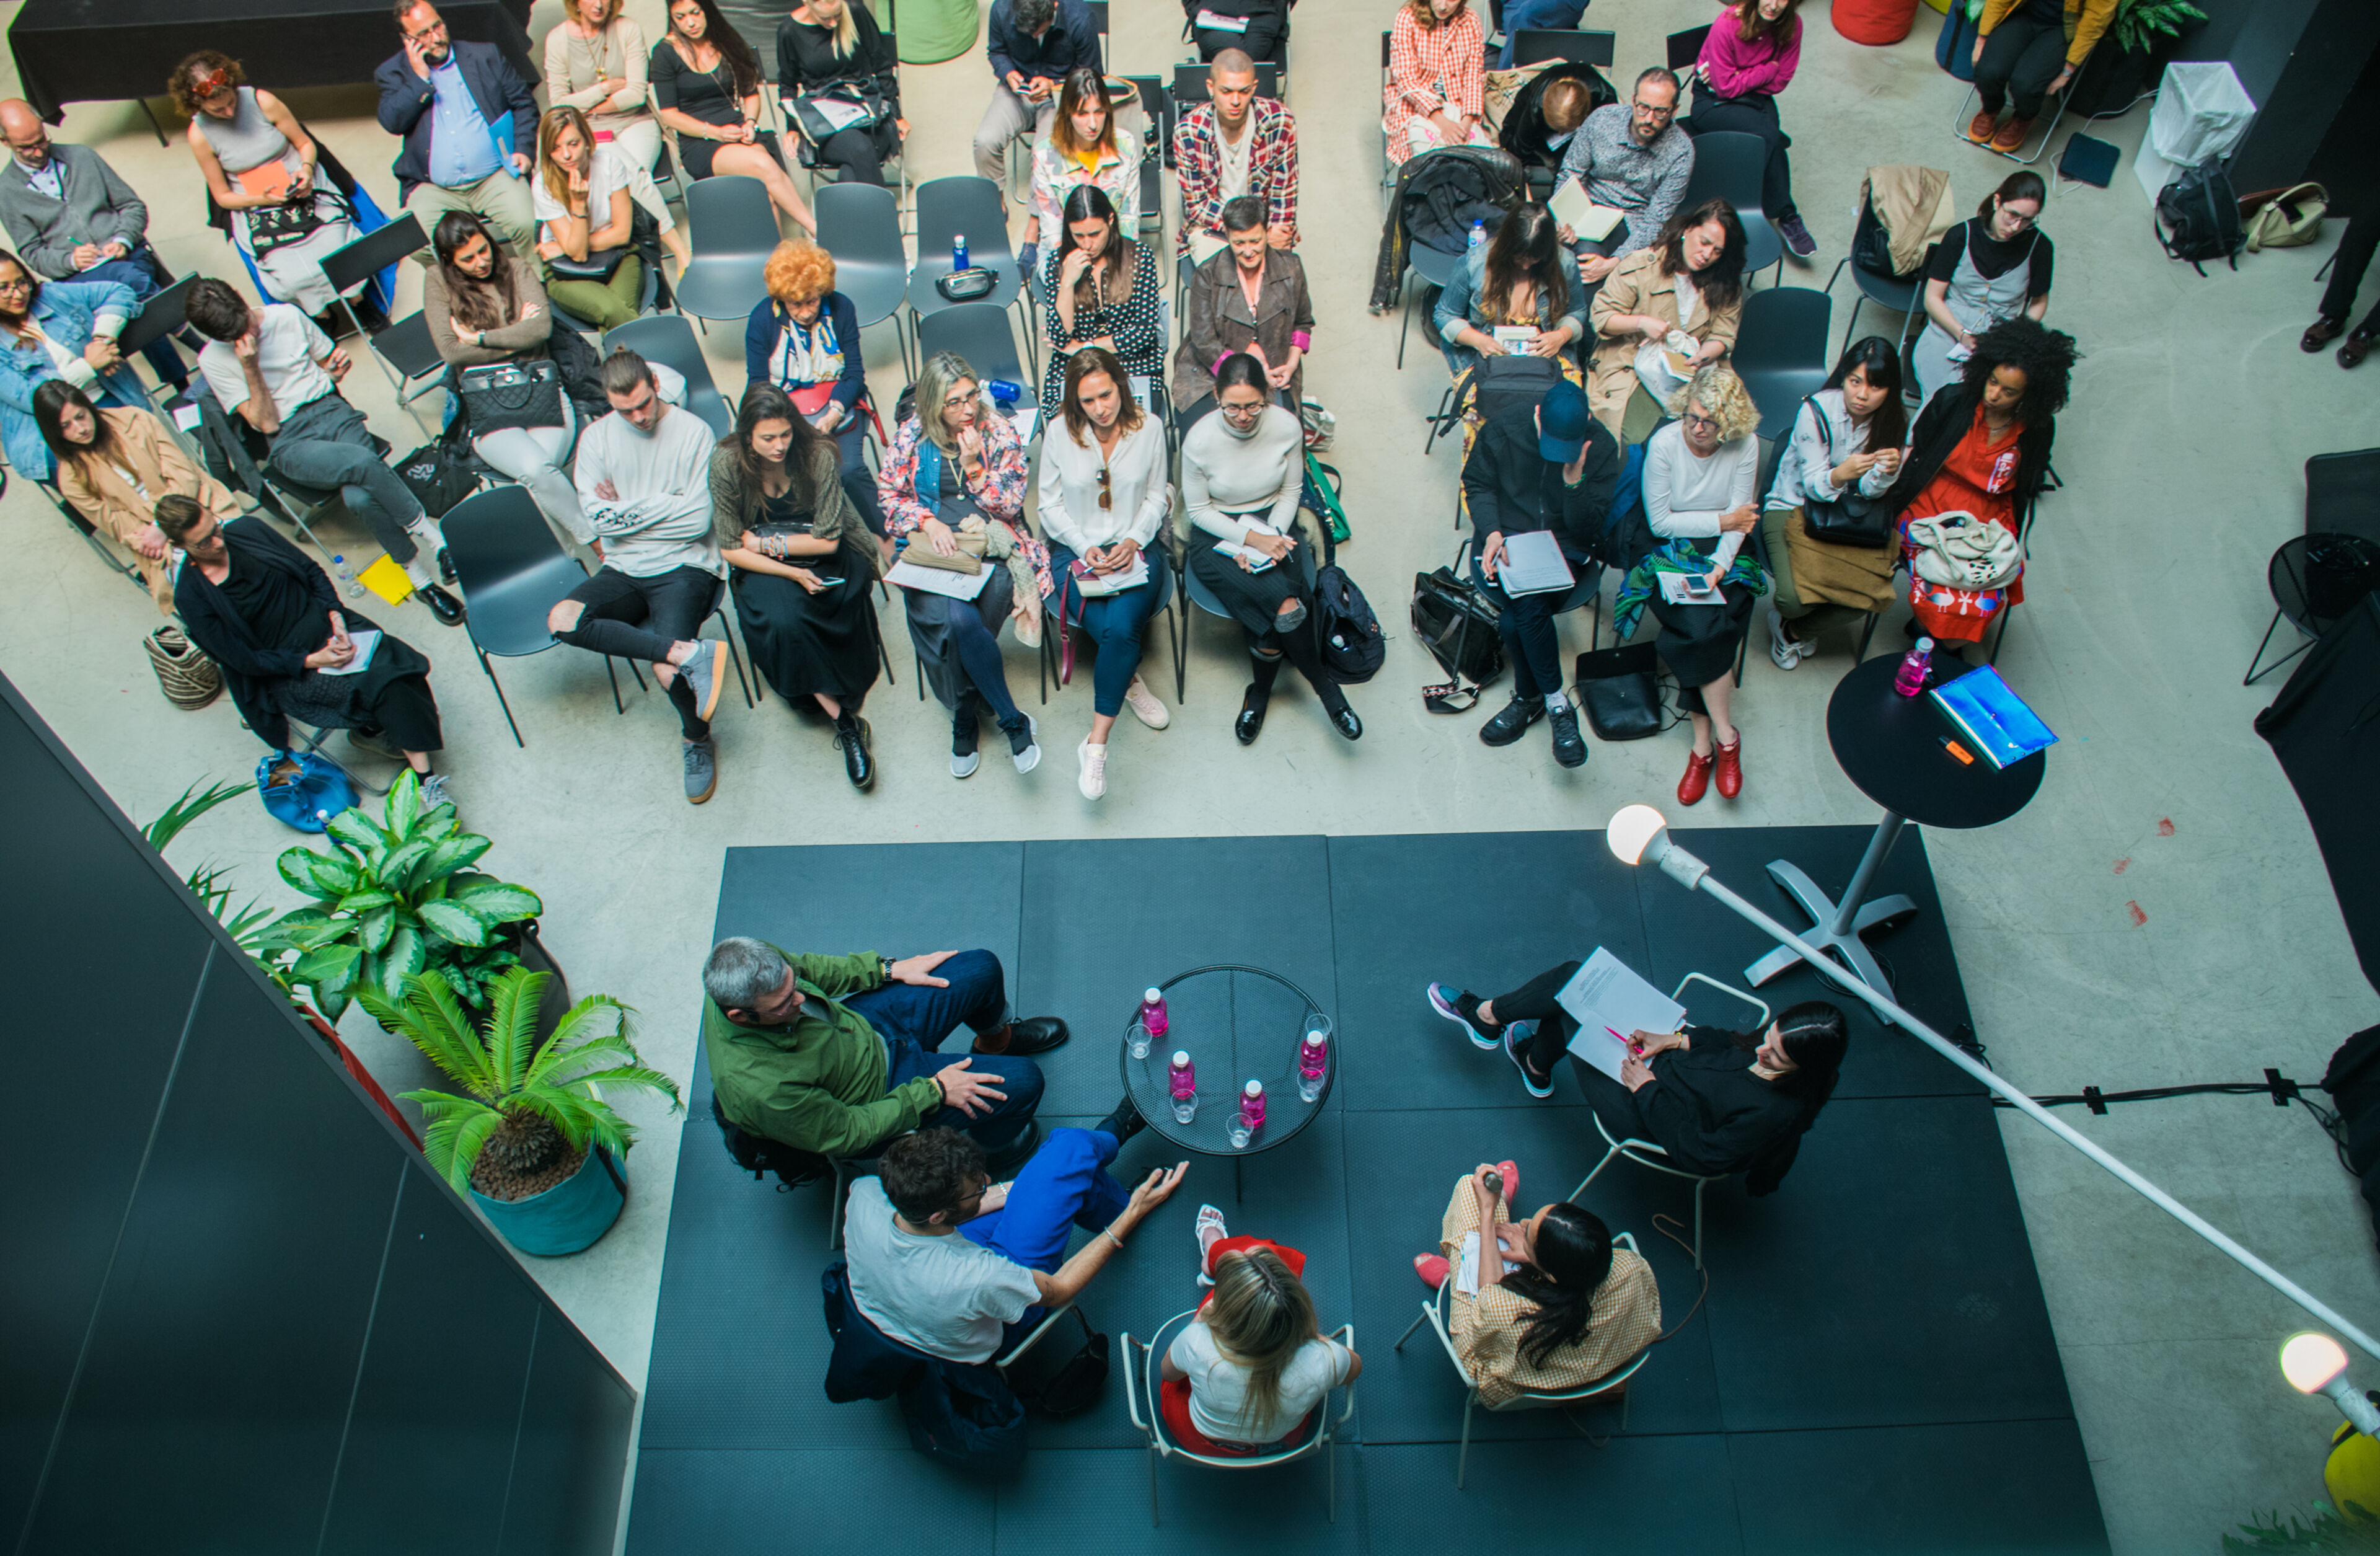 A bird's-eye view captures an engaging workshop in progress, with attendees seated in a semi-circle around the speakers, fostering a collaborative atmosphere.